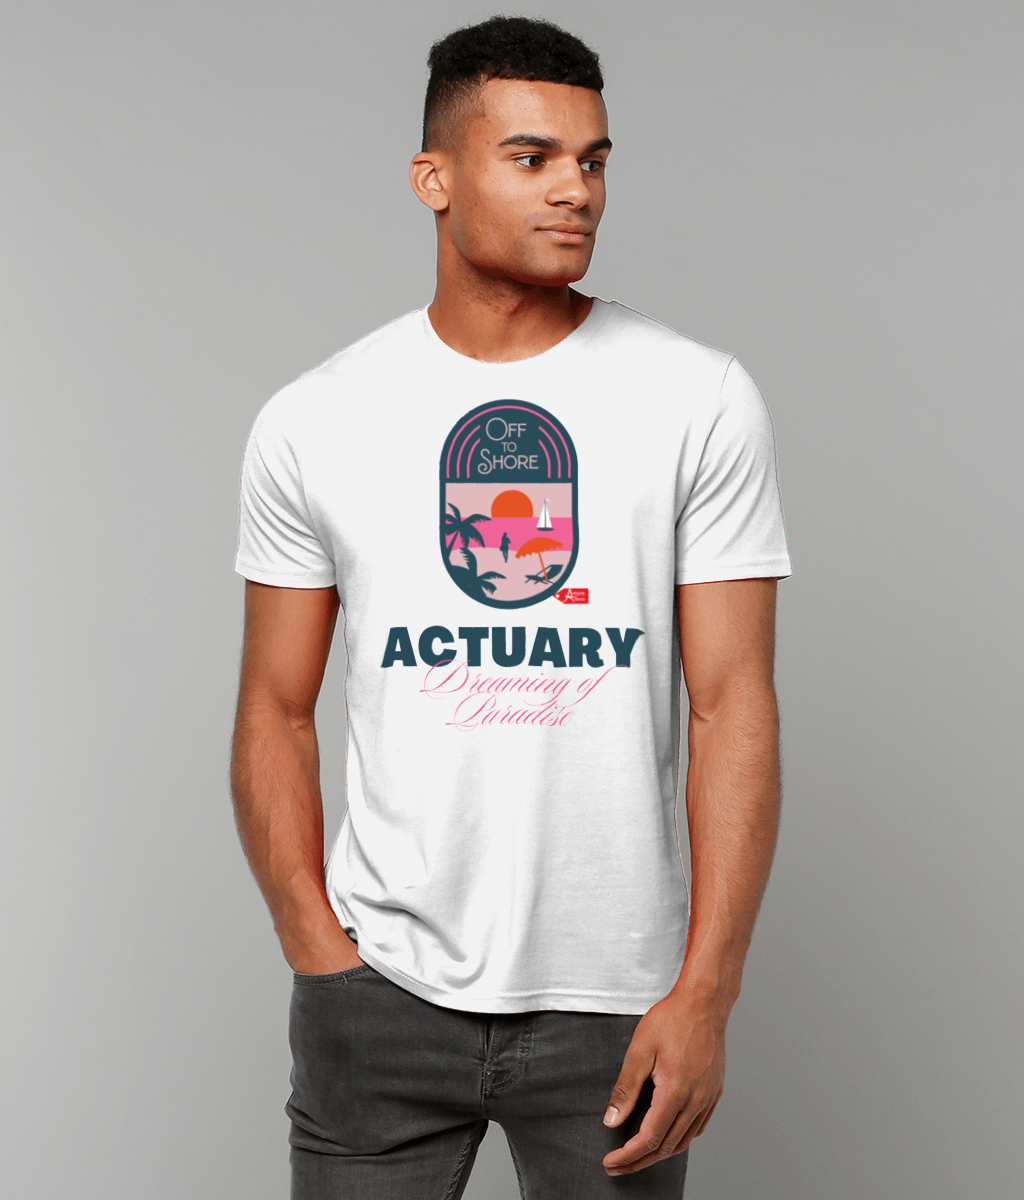 Actuary Dreaming of Paradise Off To Shore T-Shirt